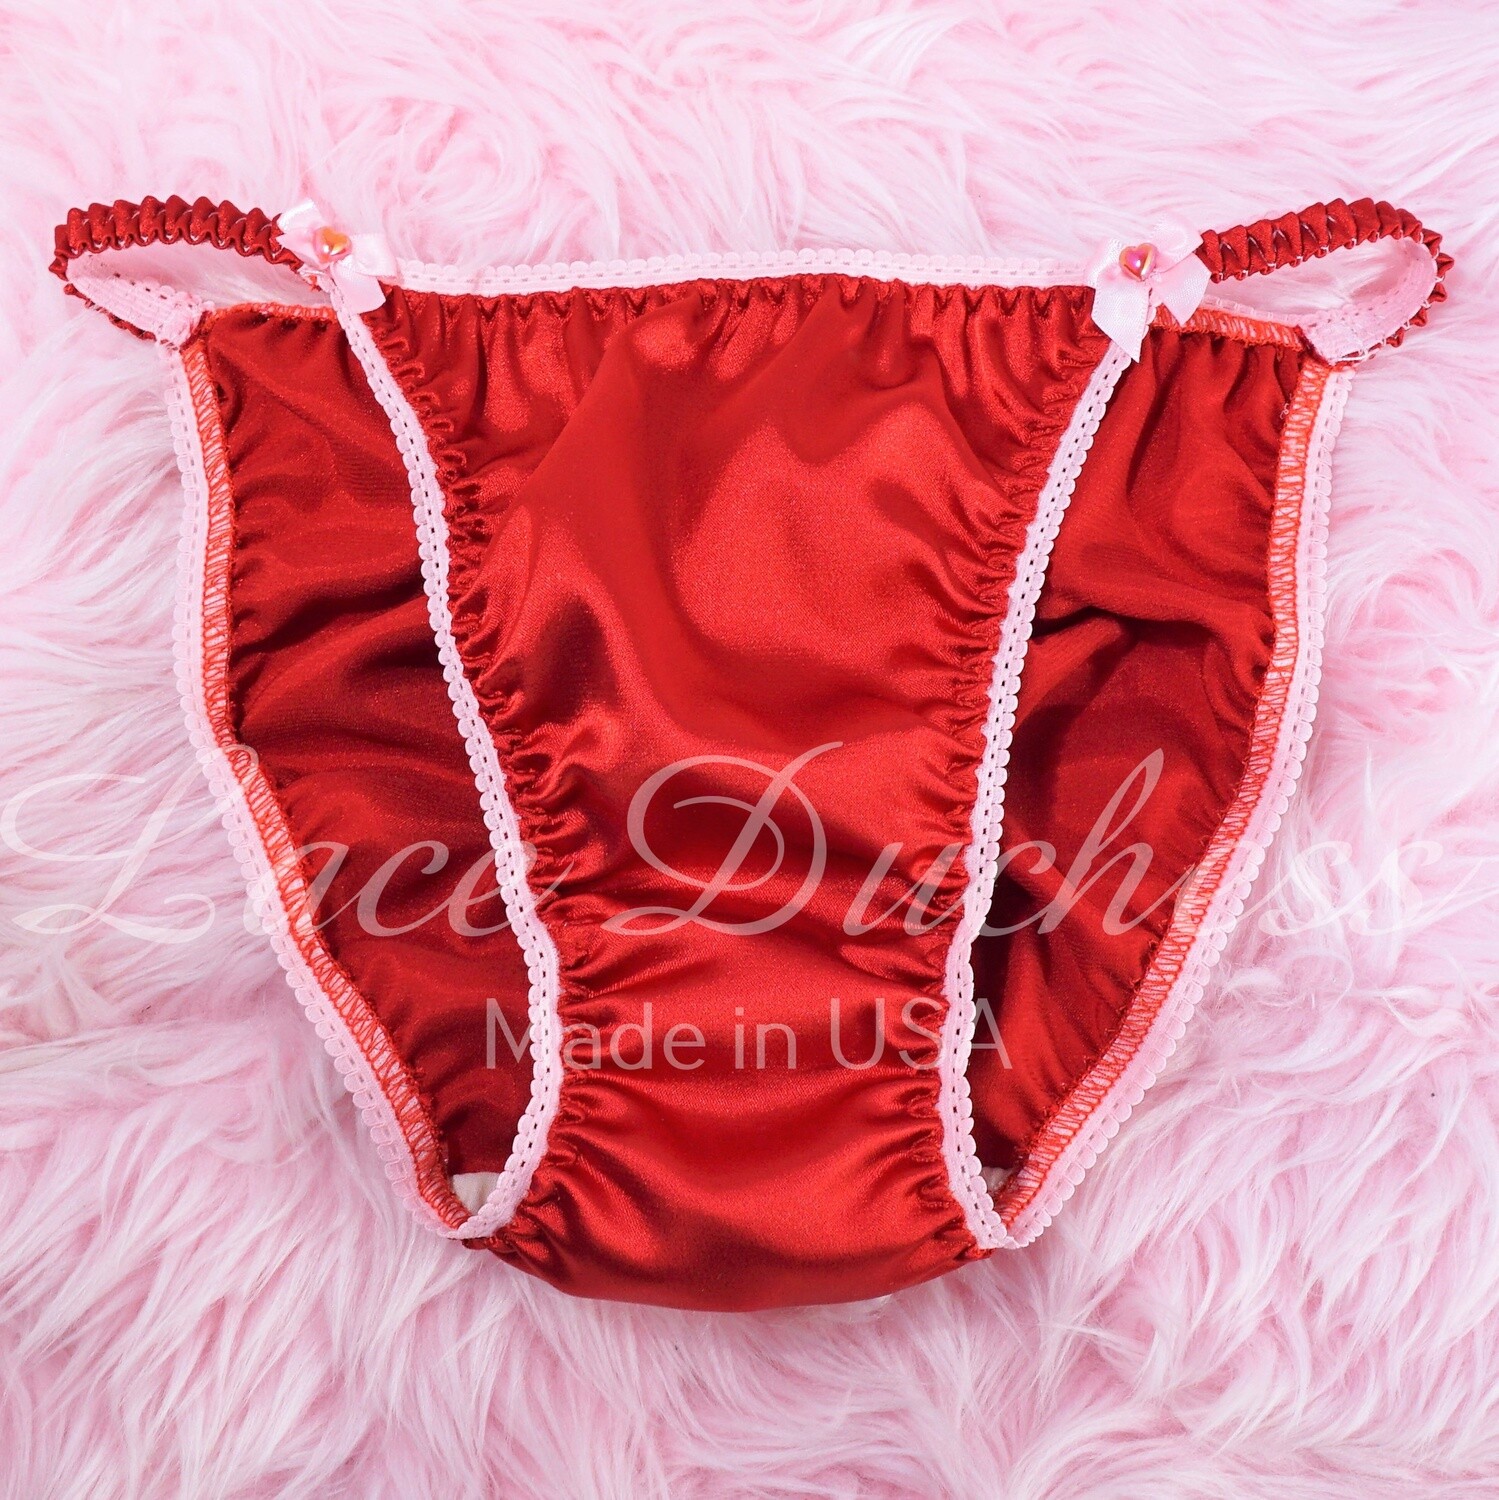 Lace Duchess red Valentines Day Classic 80's cut Red PINK satin wet look Vintage Style panties sz 5 6 7 8 9